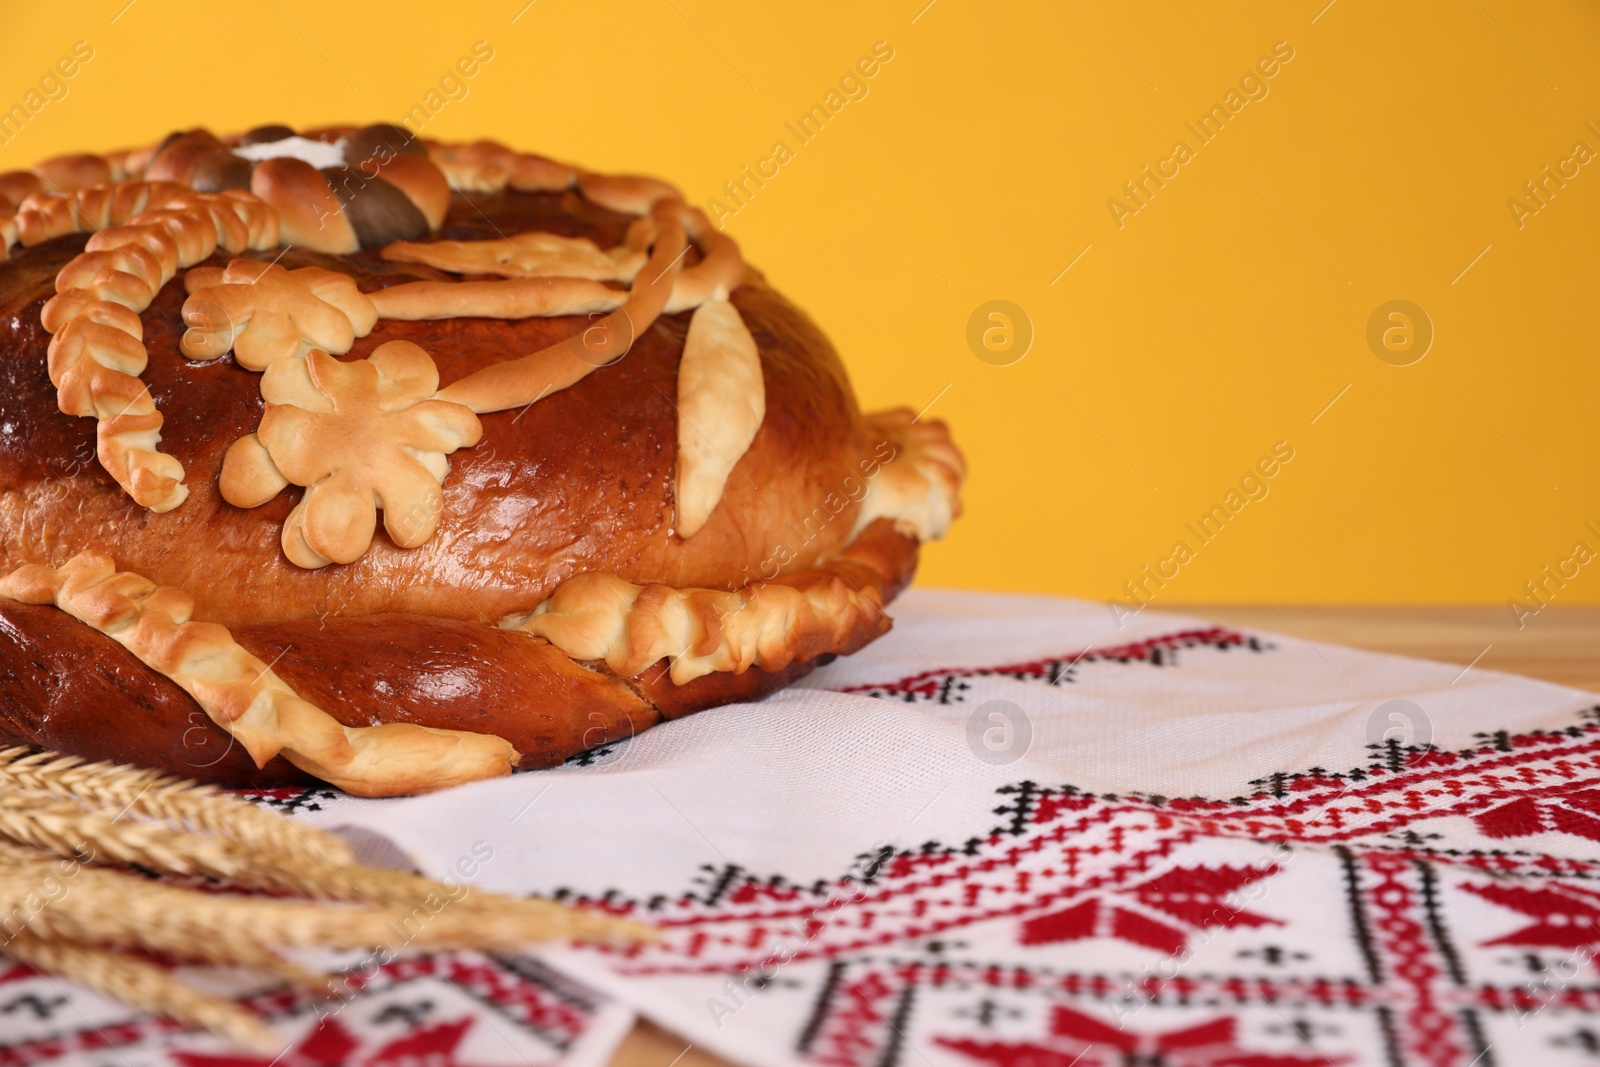 Photo of Rushnyk with korovai, wheat spikes on yellow background, closeup. Ukrainian bread and salt welcoming tradition